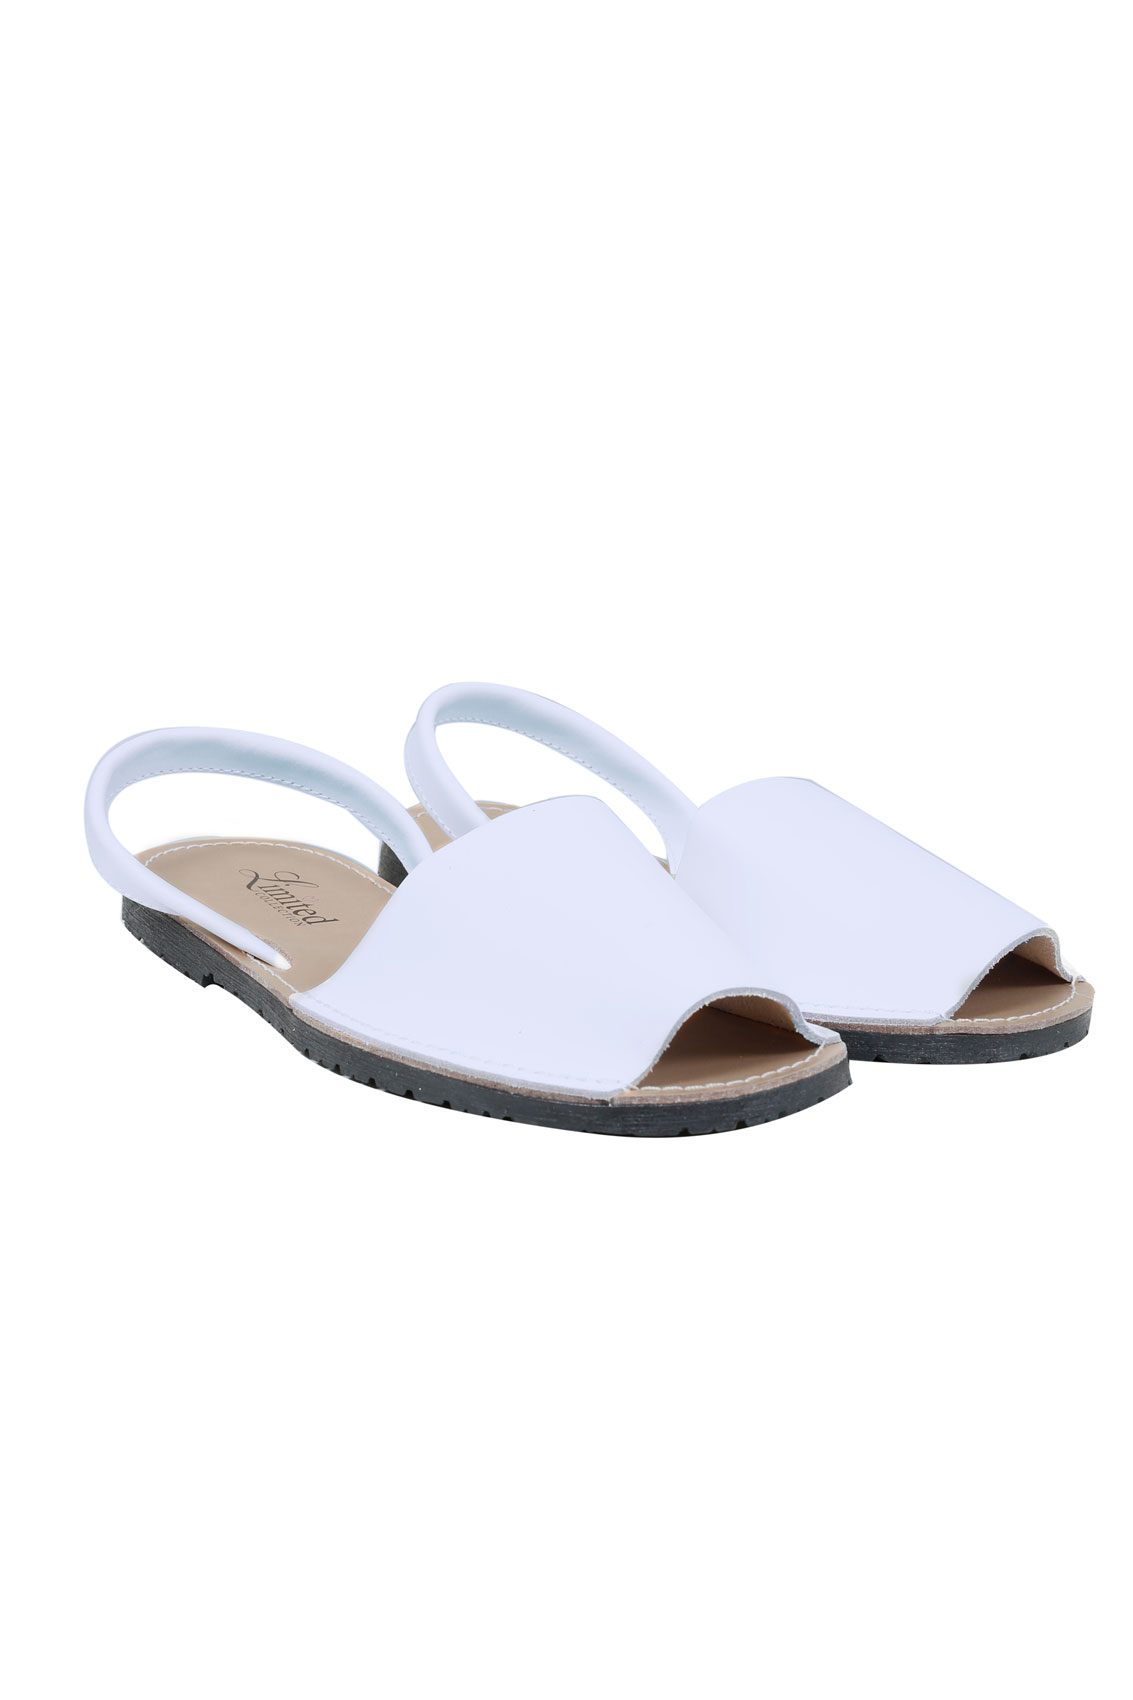 White Real Leather Peep Toe Sandals In E Fit: 4,5,6,7,8,9,10